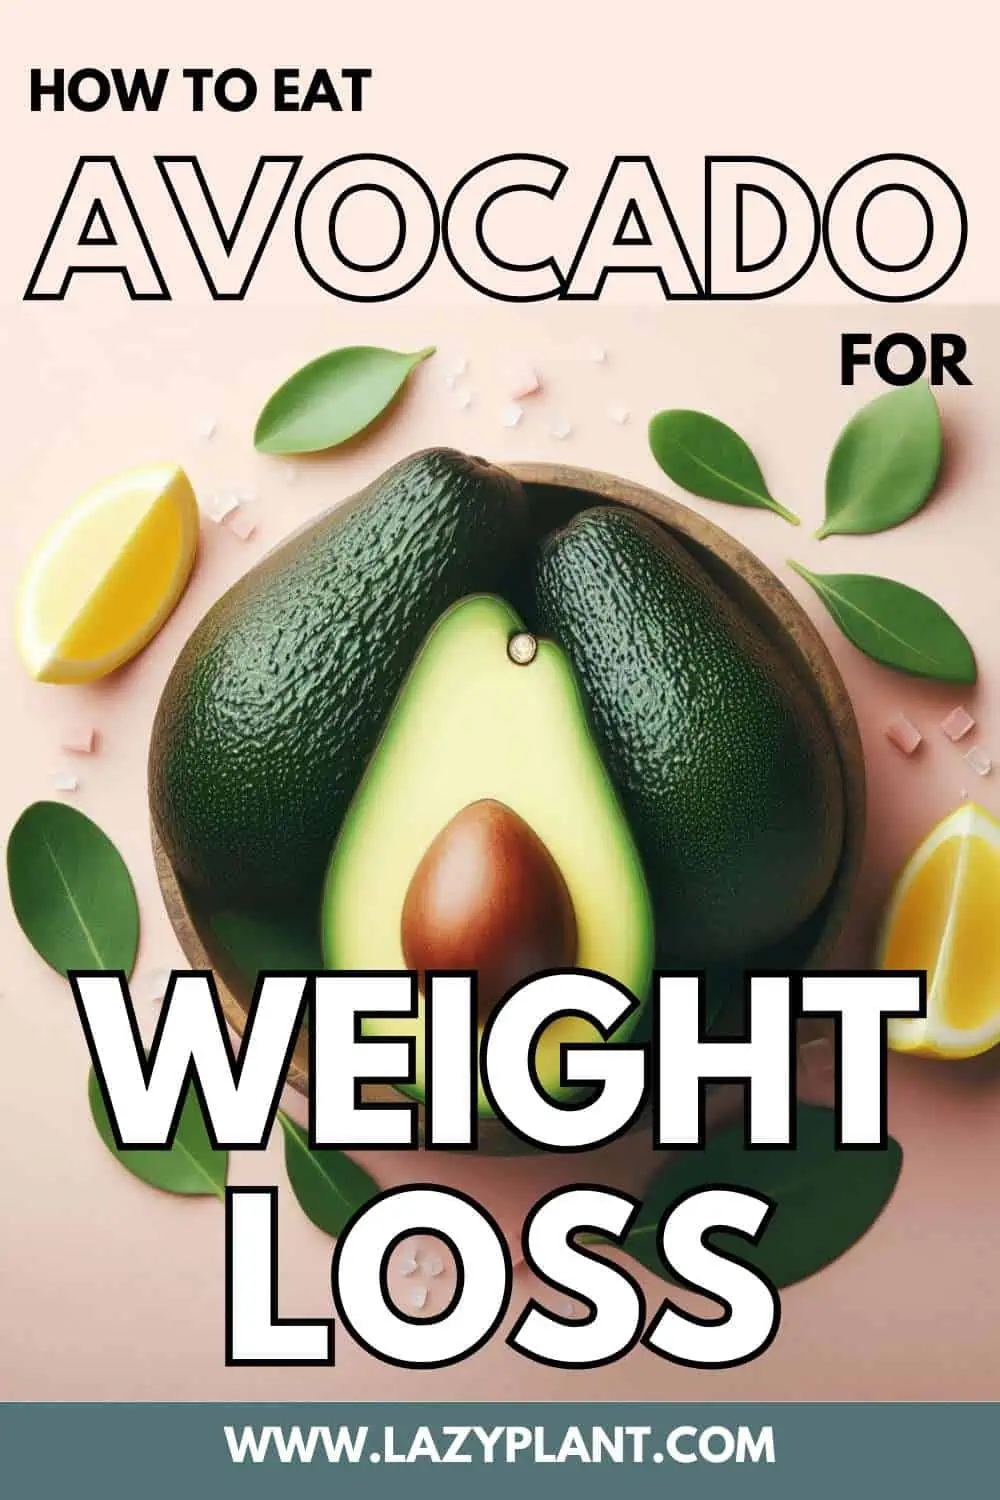 How to eat Avocado for Weight Loss?